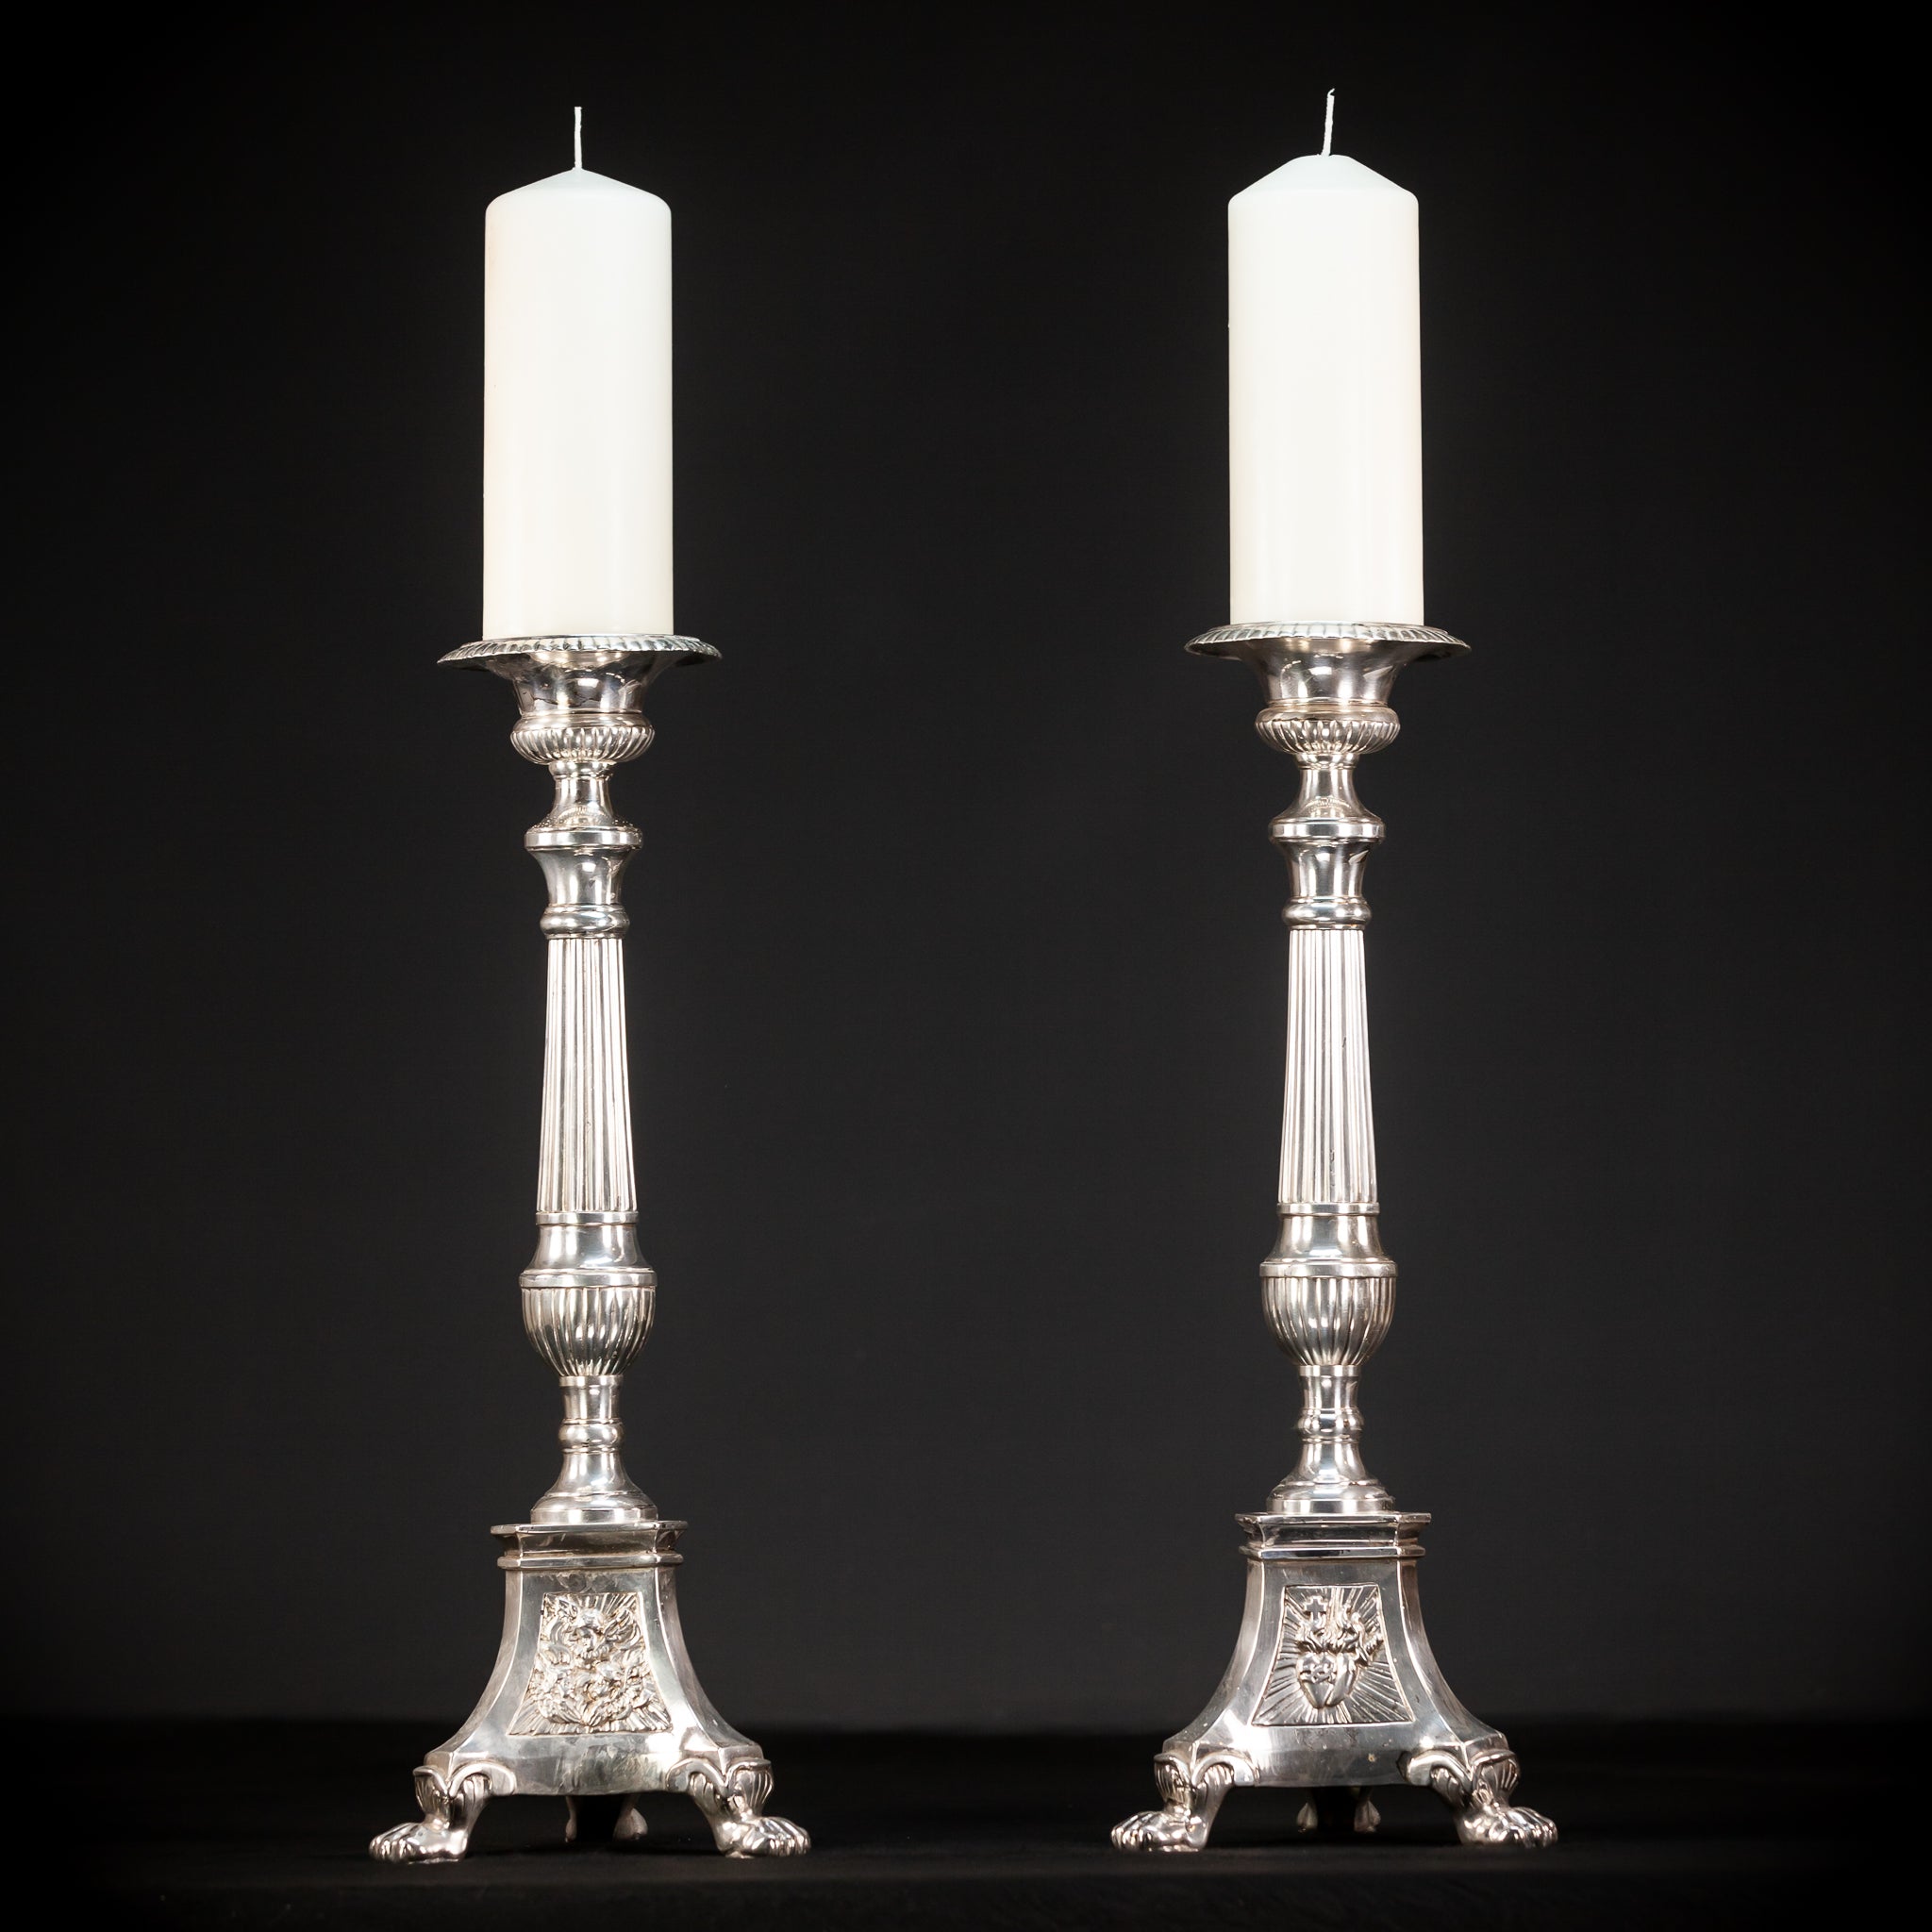 Pair of Silver Plated Bronze Candlesticks | 1800s Antique | 23.6" / 60 cm